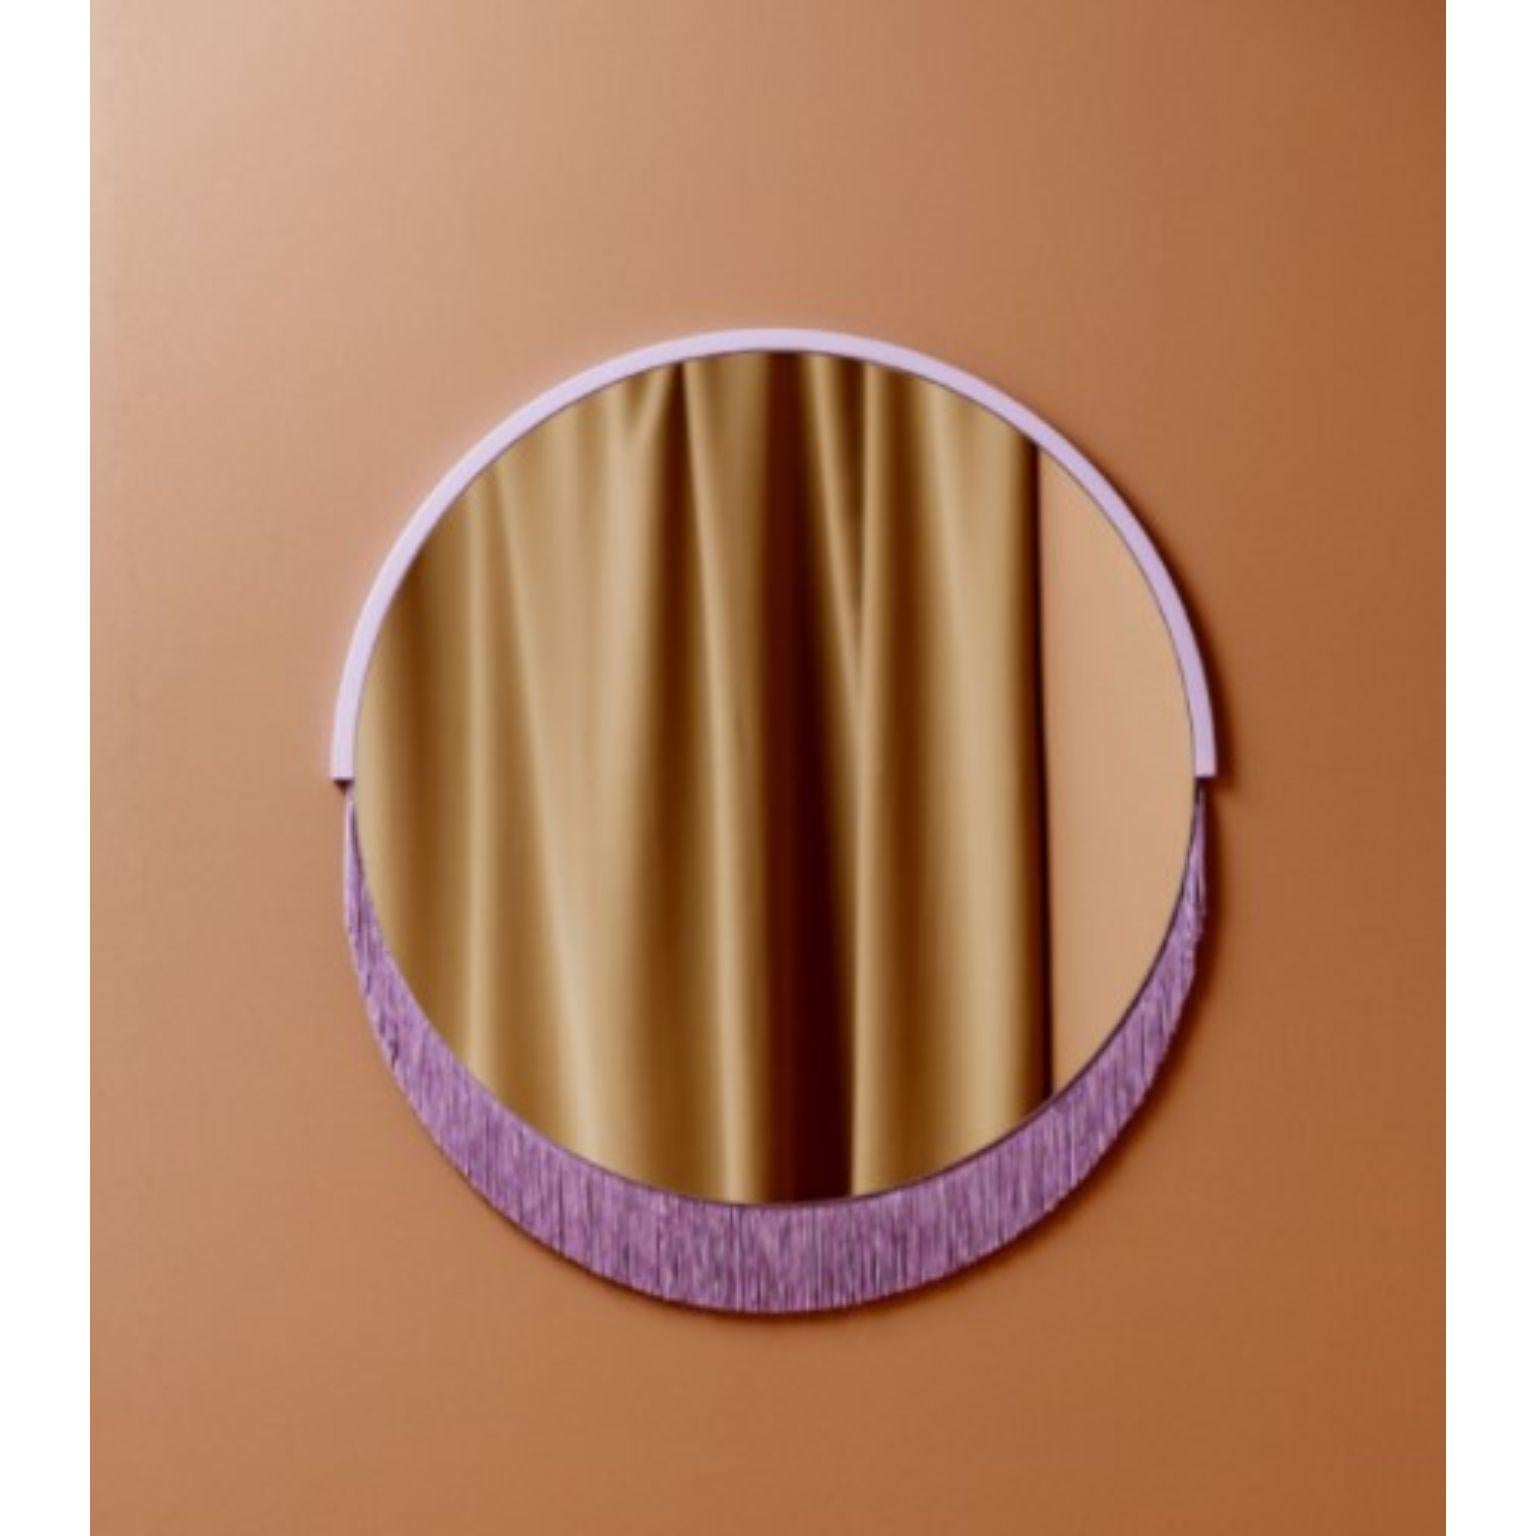 Finnish Boudoir Small Wall Mirror by Tero Kuitunen For Sale